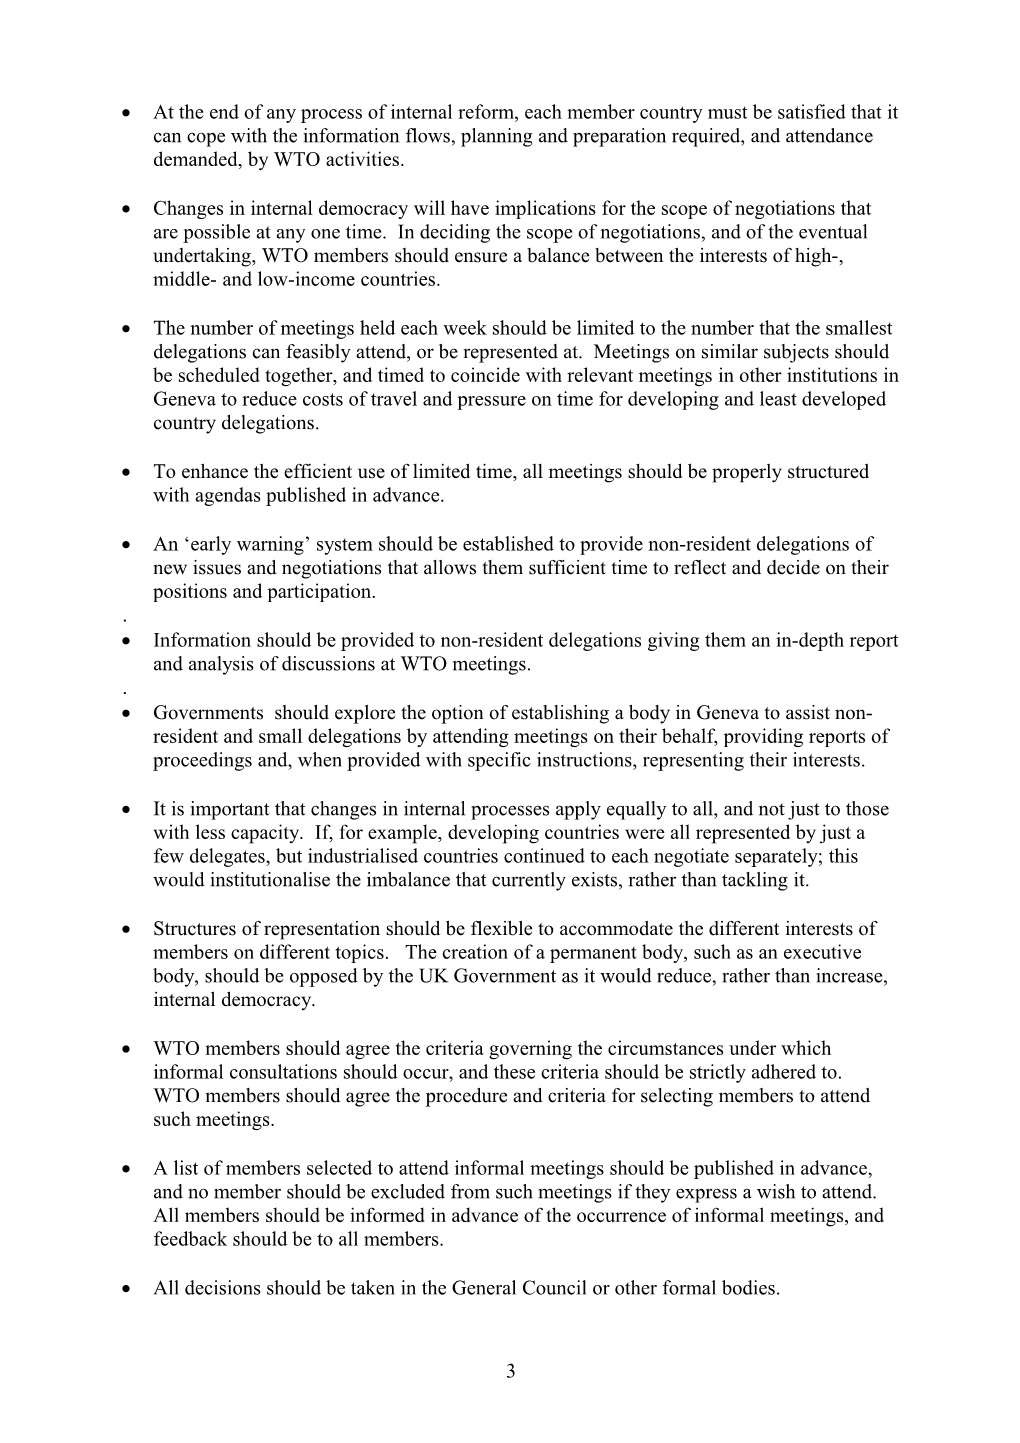 Recommendations for Ways Forward on Institutional Reform of the World Trade Organisation